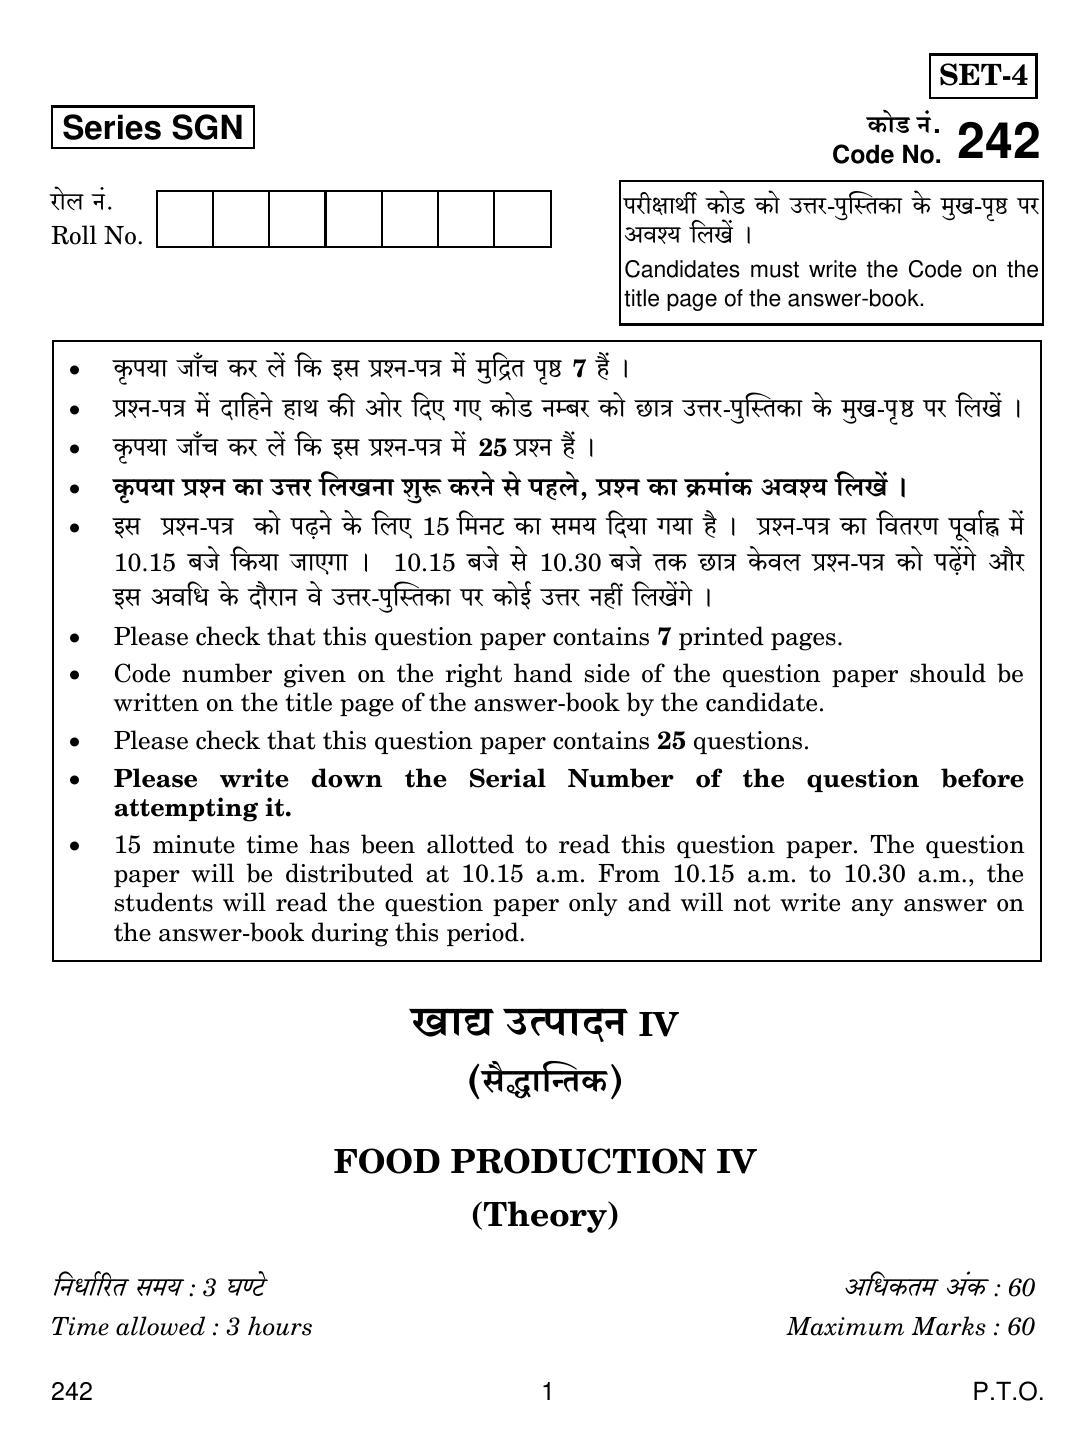 CBSE Class 12 242 FOOD PRODUCTION IV 2018 Question Paper - Page 1